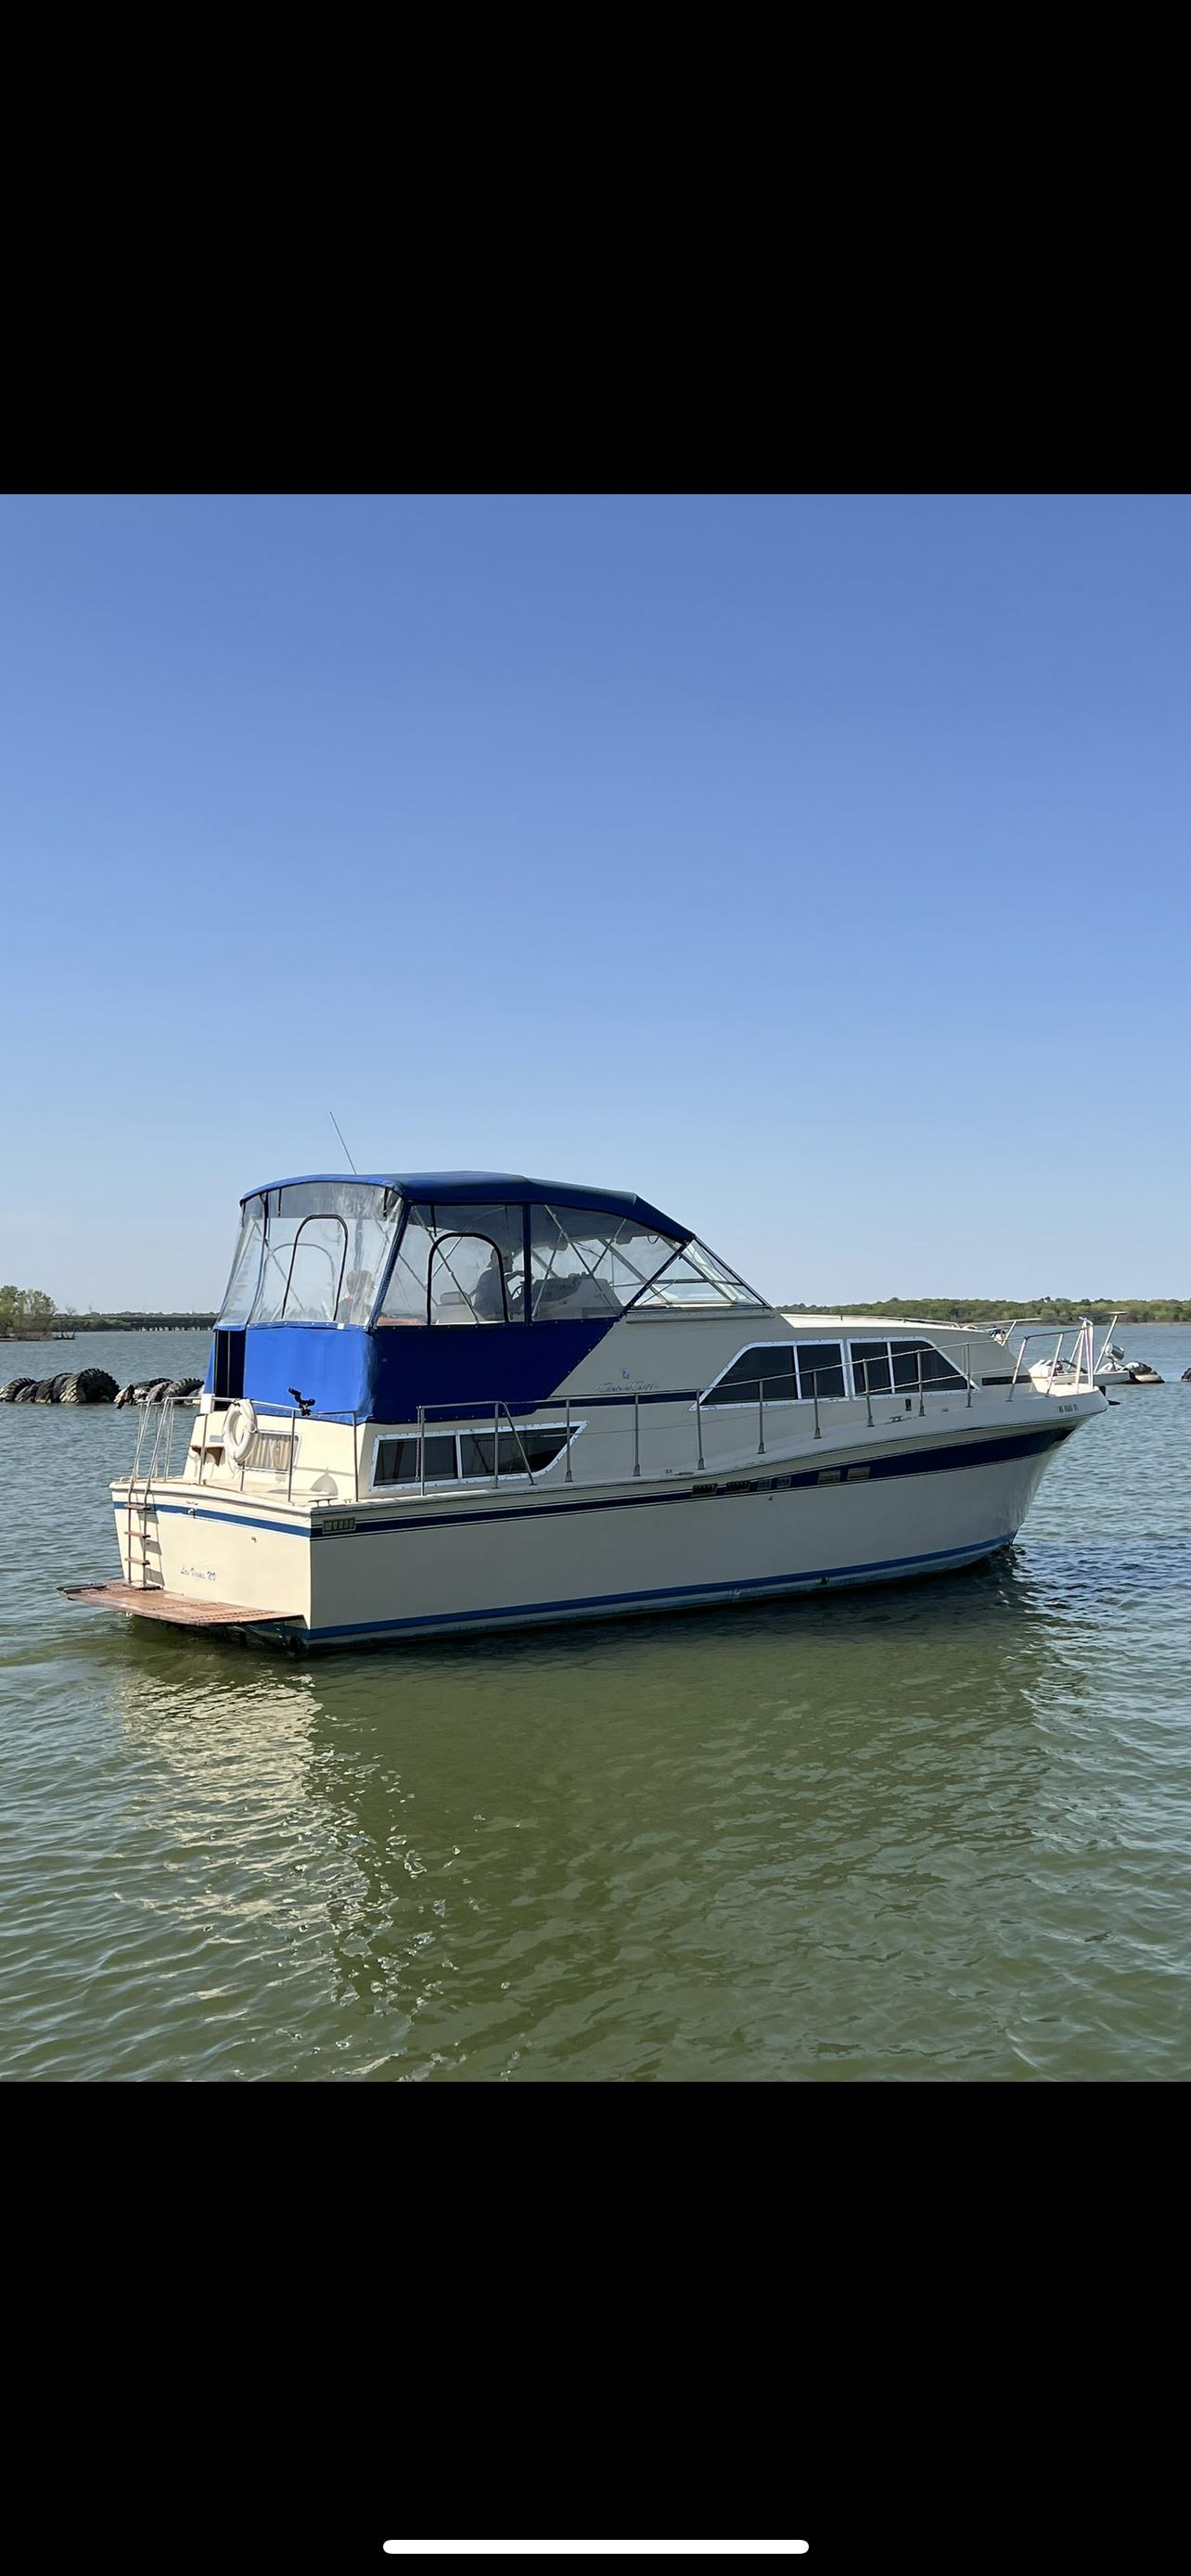 Ranger Boats 620DVS Boat for sale in Frisco, TX for $41,000